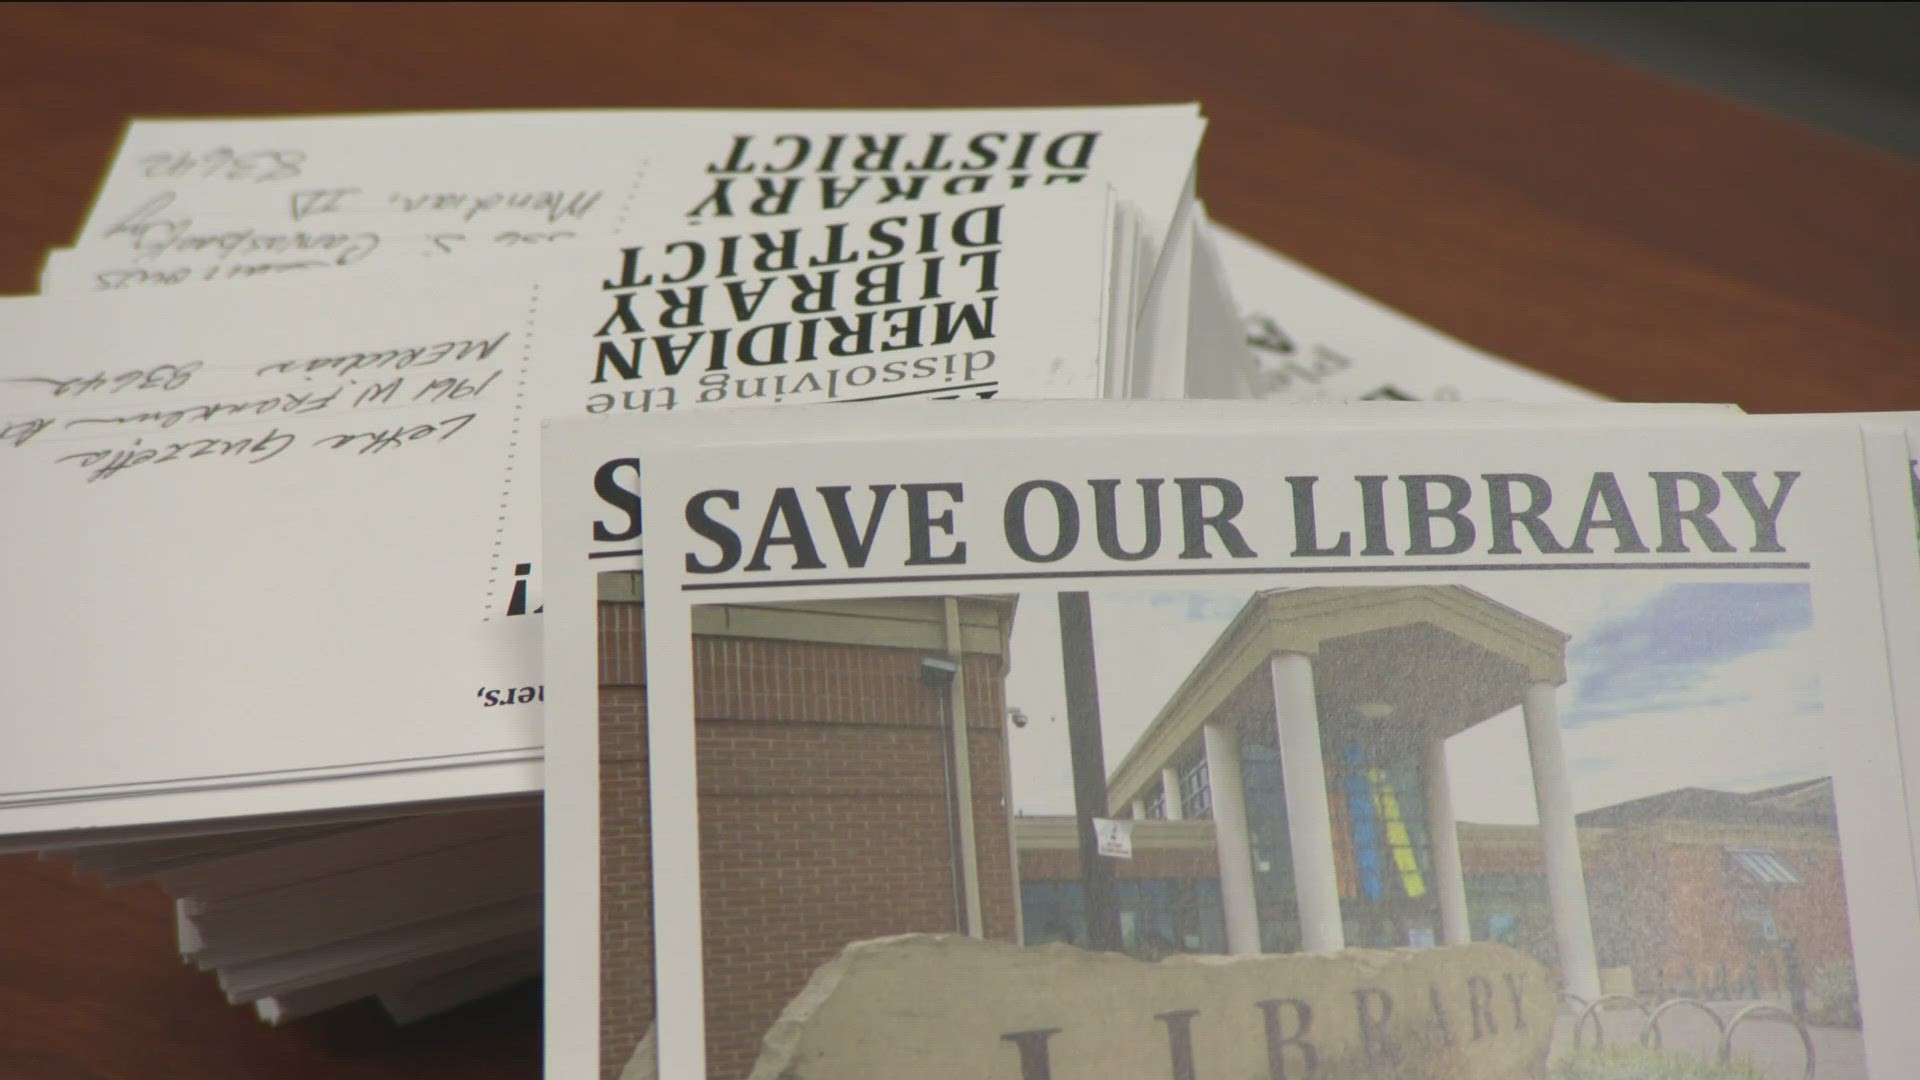 The three commissioners, all Republicans, said there are other, more narrowly tailored ways to address concerns about what's in some of the library's books.